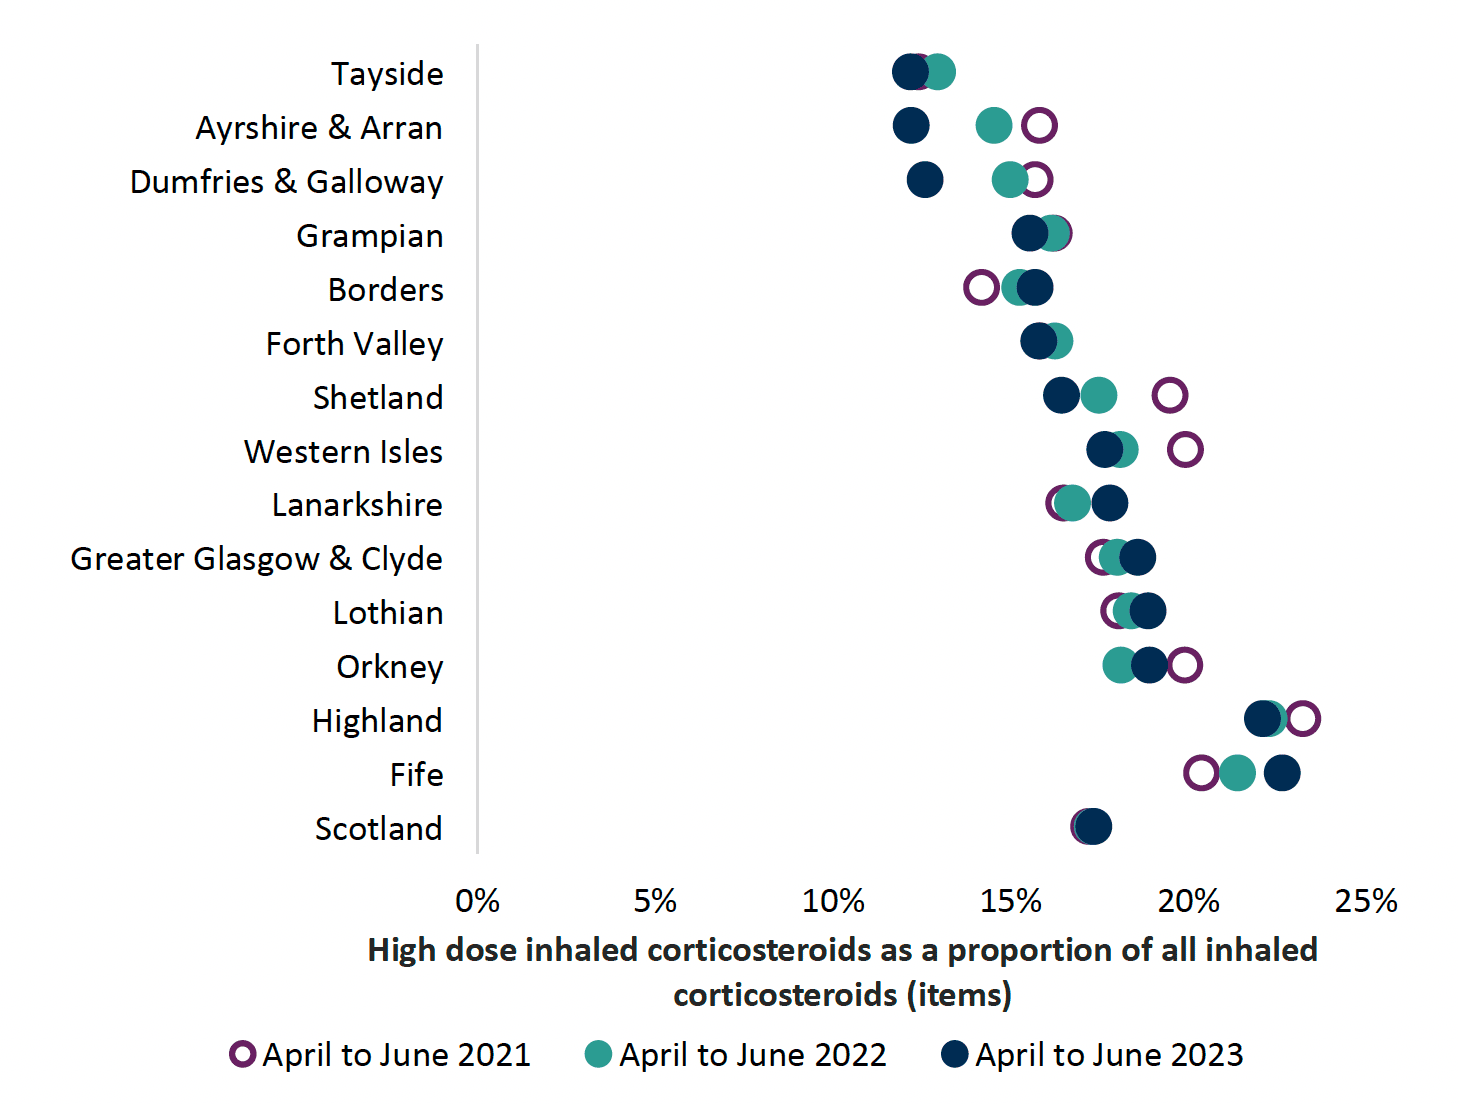 Chart comparing high dose corticosteroid inhalers as a percentage of all corticosteroid inhaler items between health boards and Scotland in 2021, 2022 and 2023. Overall Scotland trend is increasing